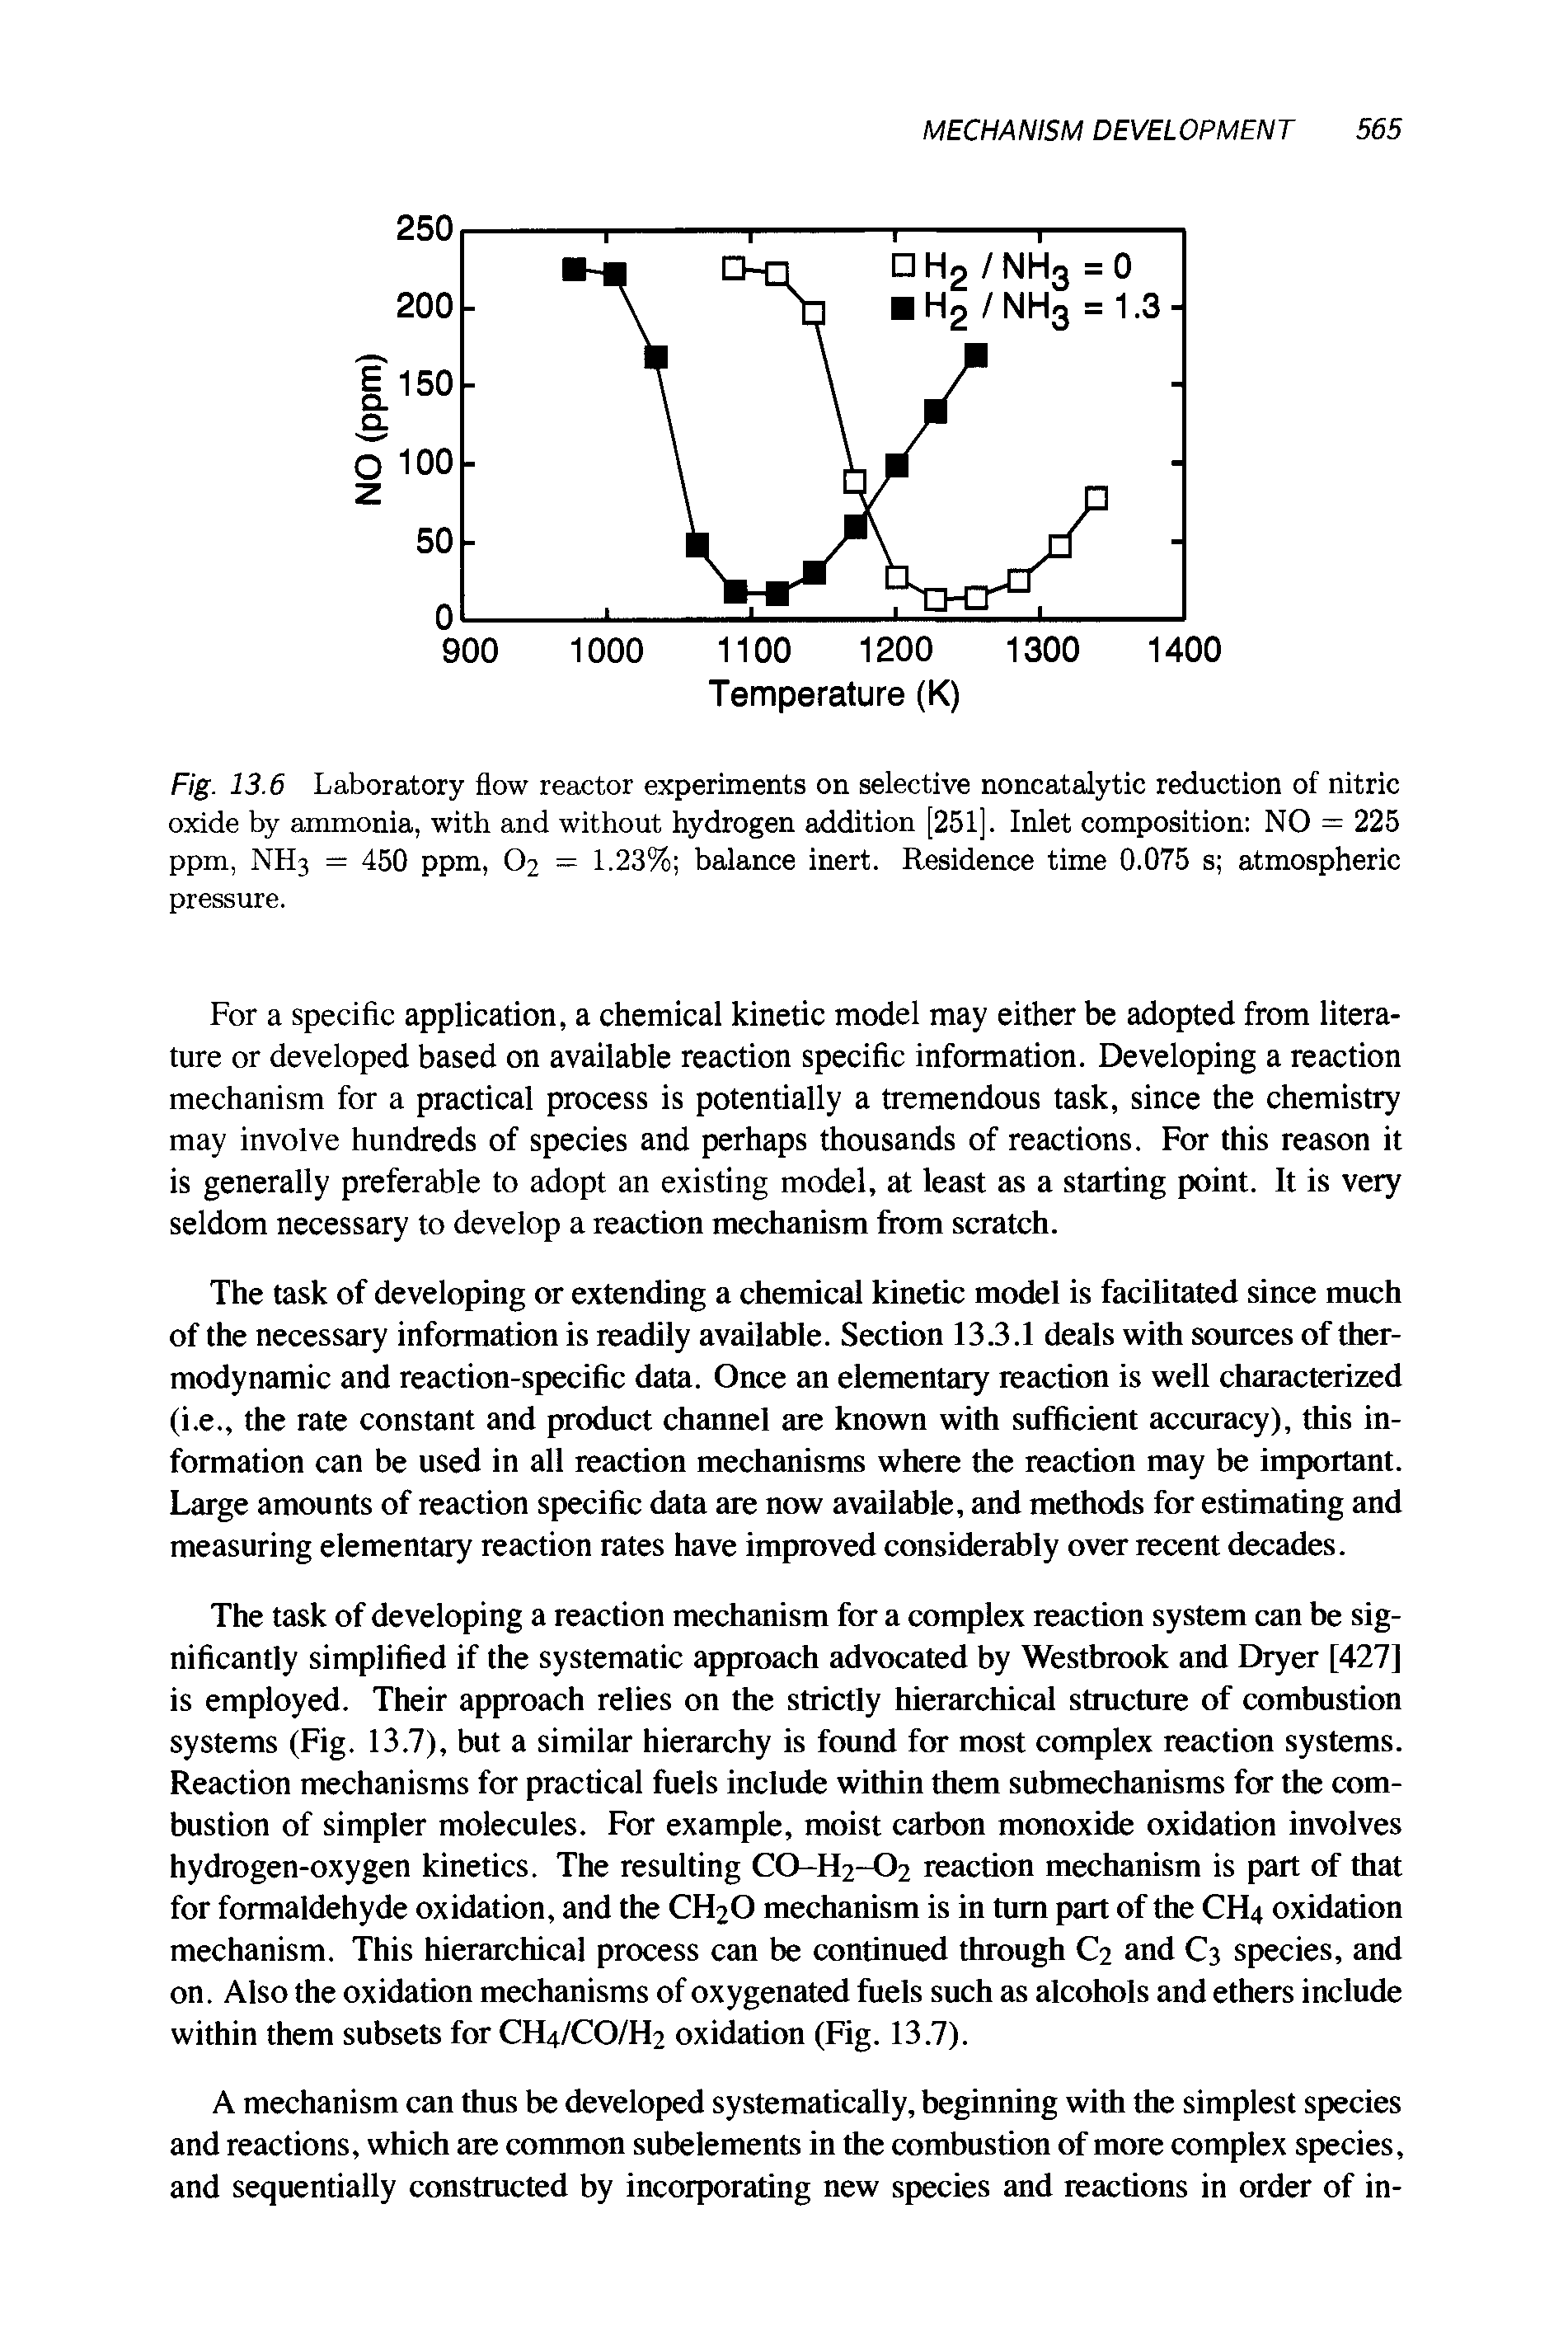 Fig. 13.6 Laboratory flow reactor experiments on selective noncatalytic reduction of nitric oxide by ammonia, with and without hydrogen addition [251]. Inlet composition NO = 225 ppm, NH3 = 450 ppm, O2 = 1.23% balance inert. Residence time 0.075 s atmospheric pressure.